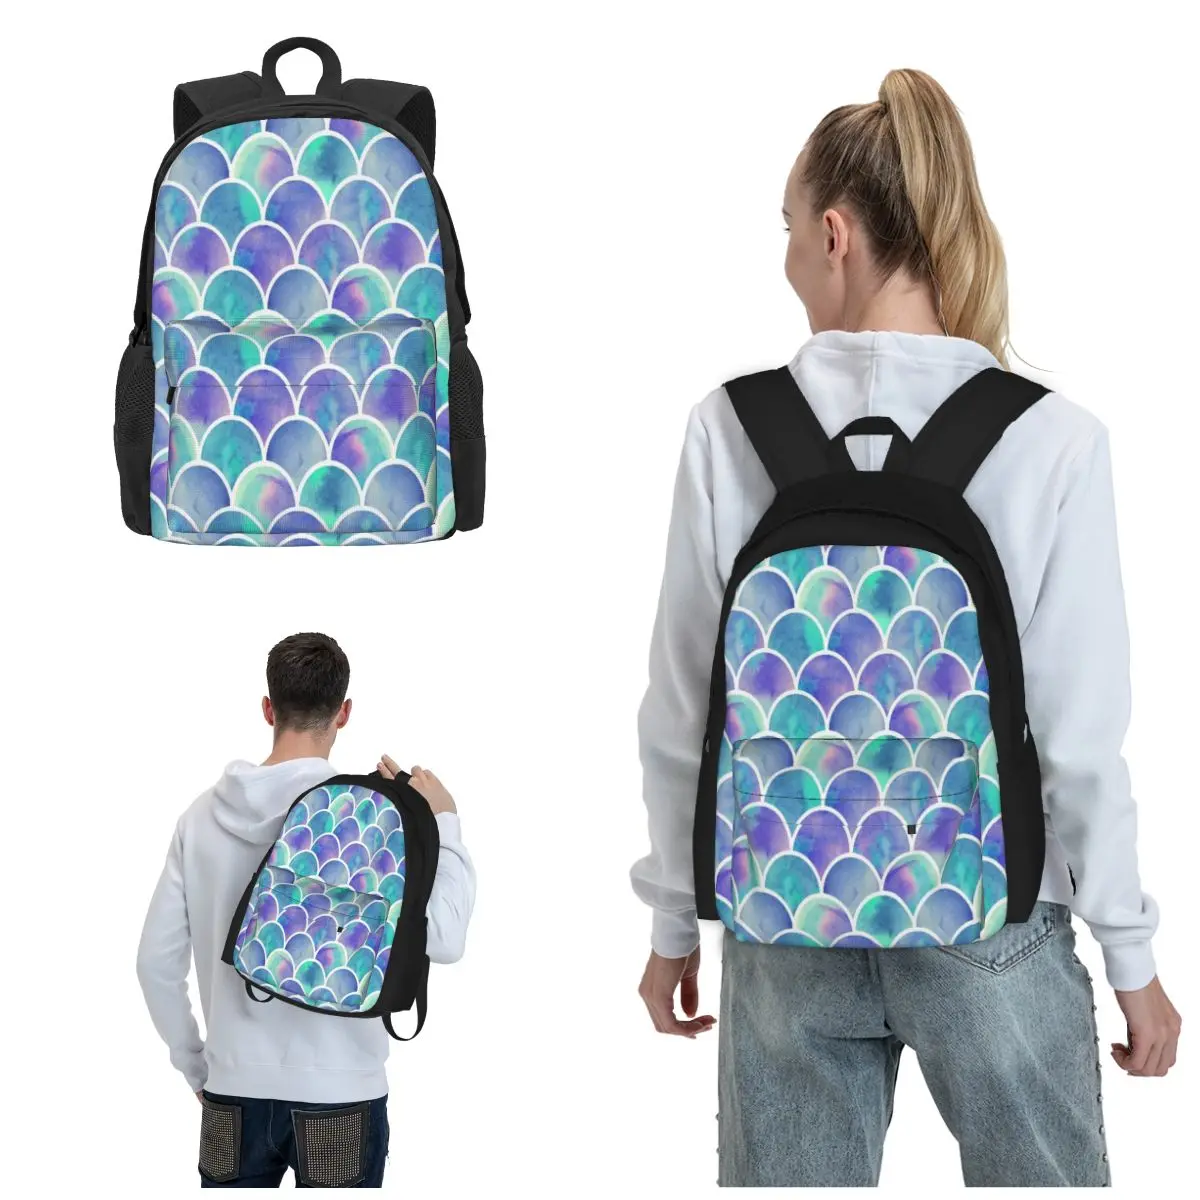 

Rainbow Mermaid Scale Urban Sophistication Meets Practicality In Our City-Ready Backpacks Computer Bag Casual Travel Bookbag